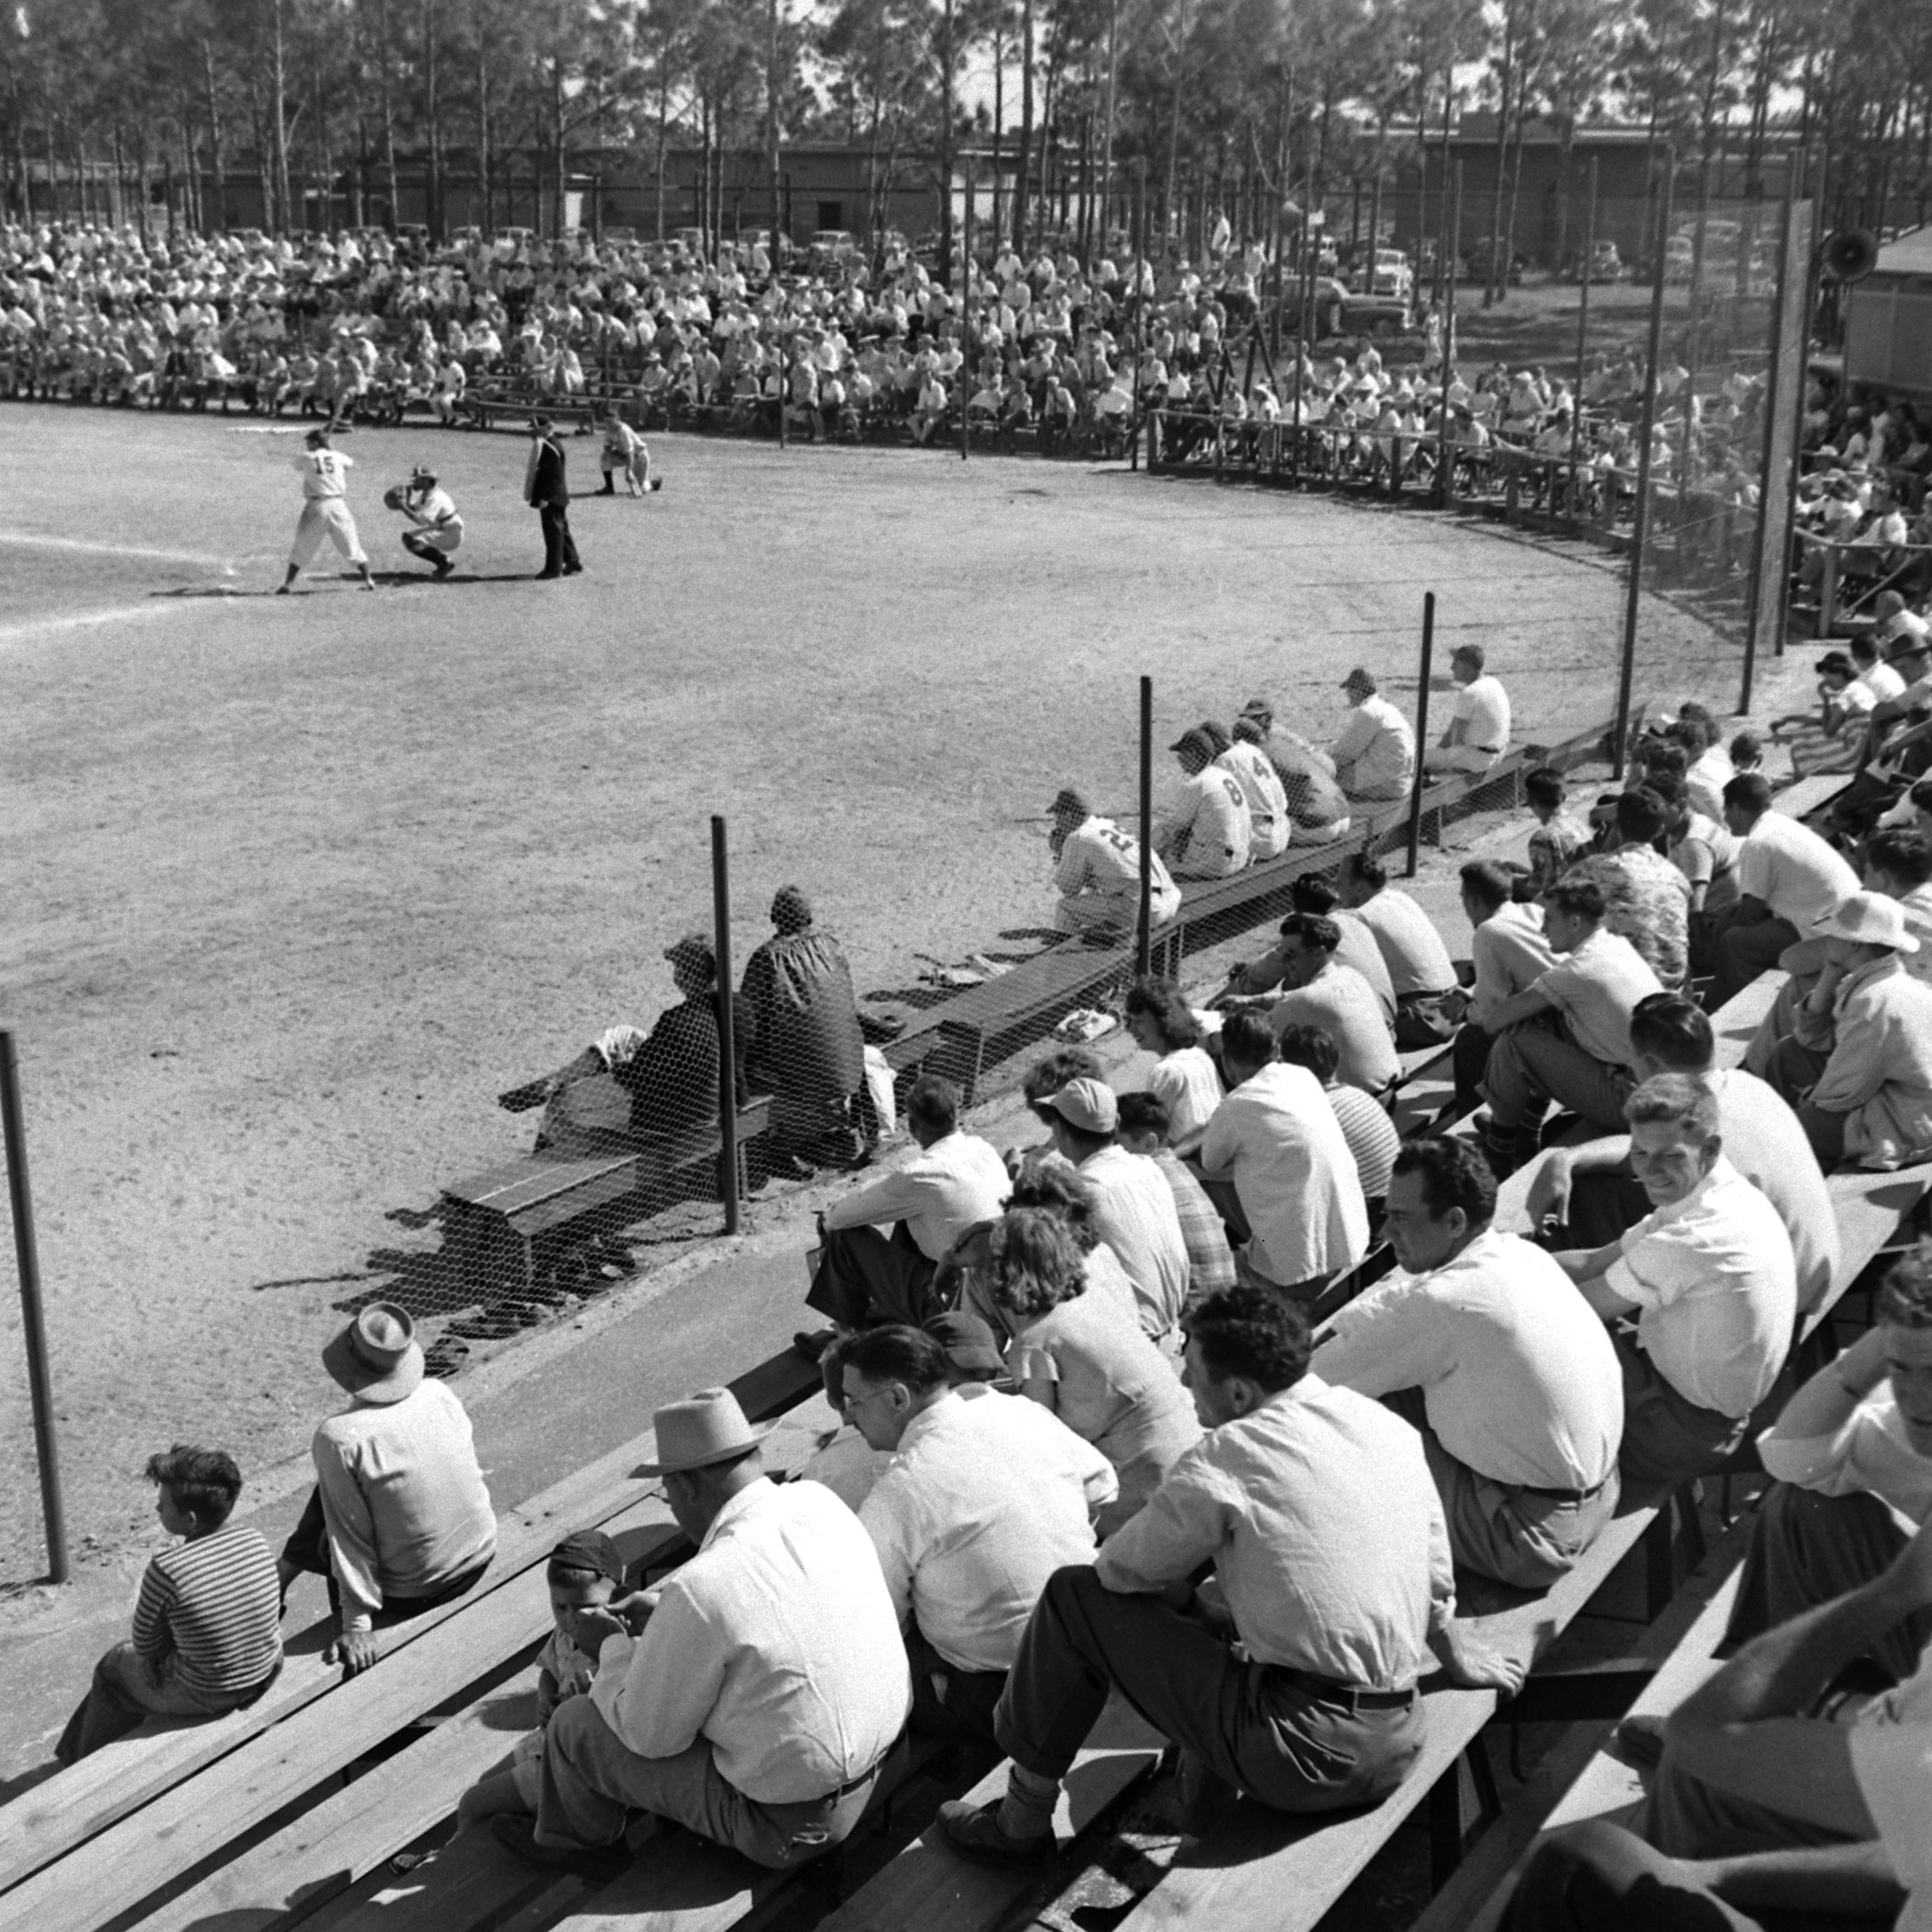 Brooklyn Dodger rookies and prospects in a spring training scrimmage, Vero Beach, Fla., 1948.